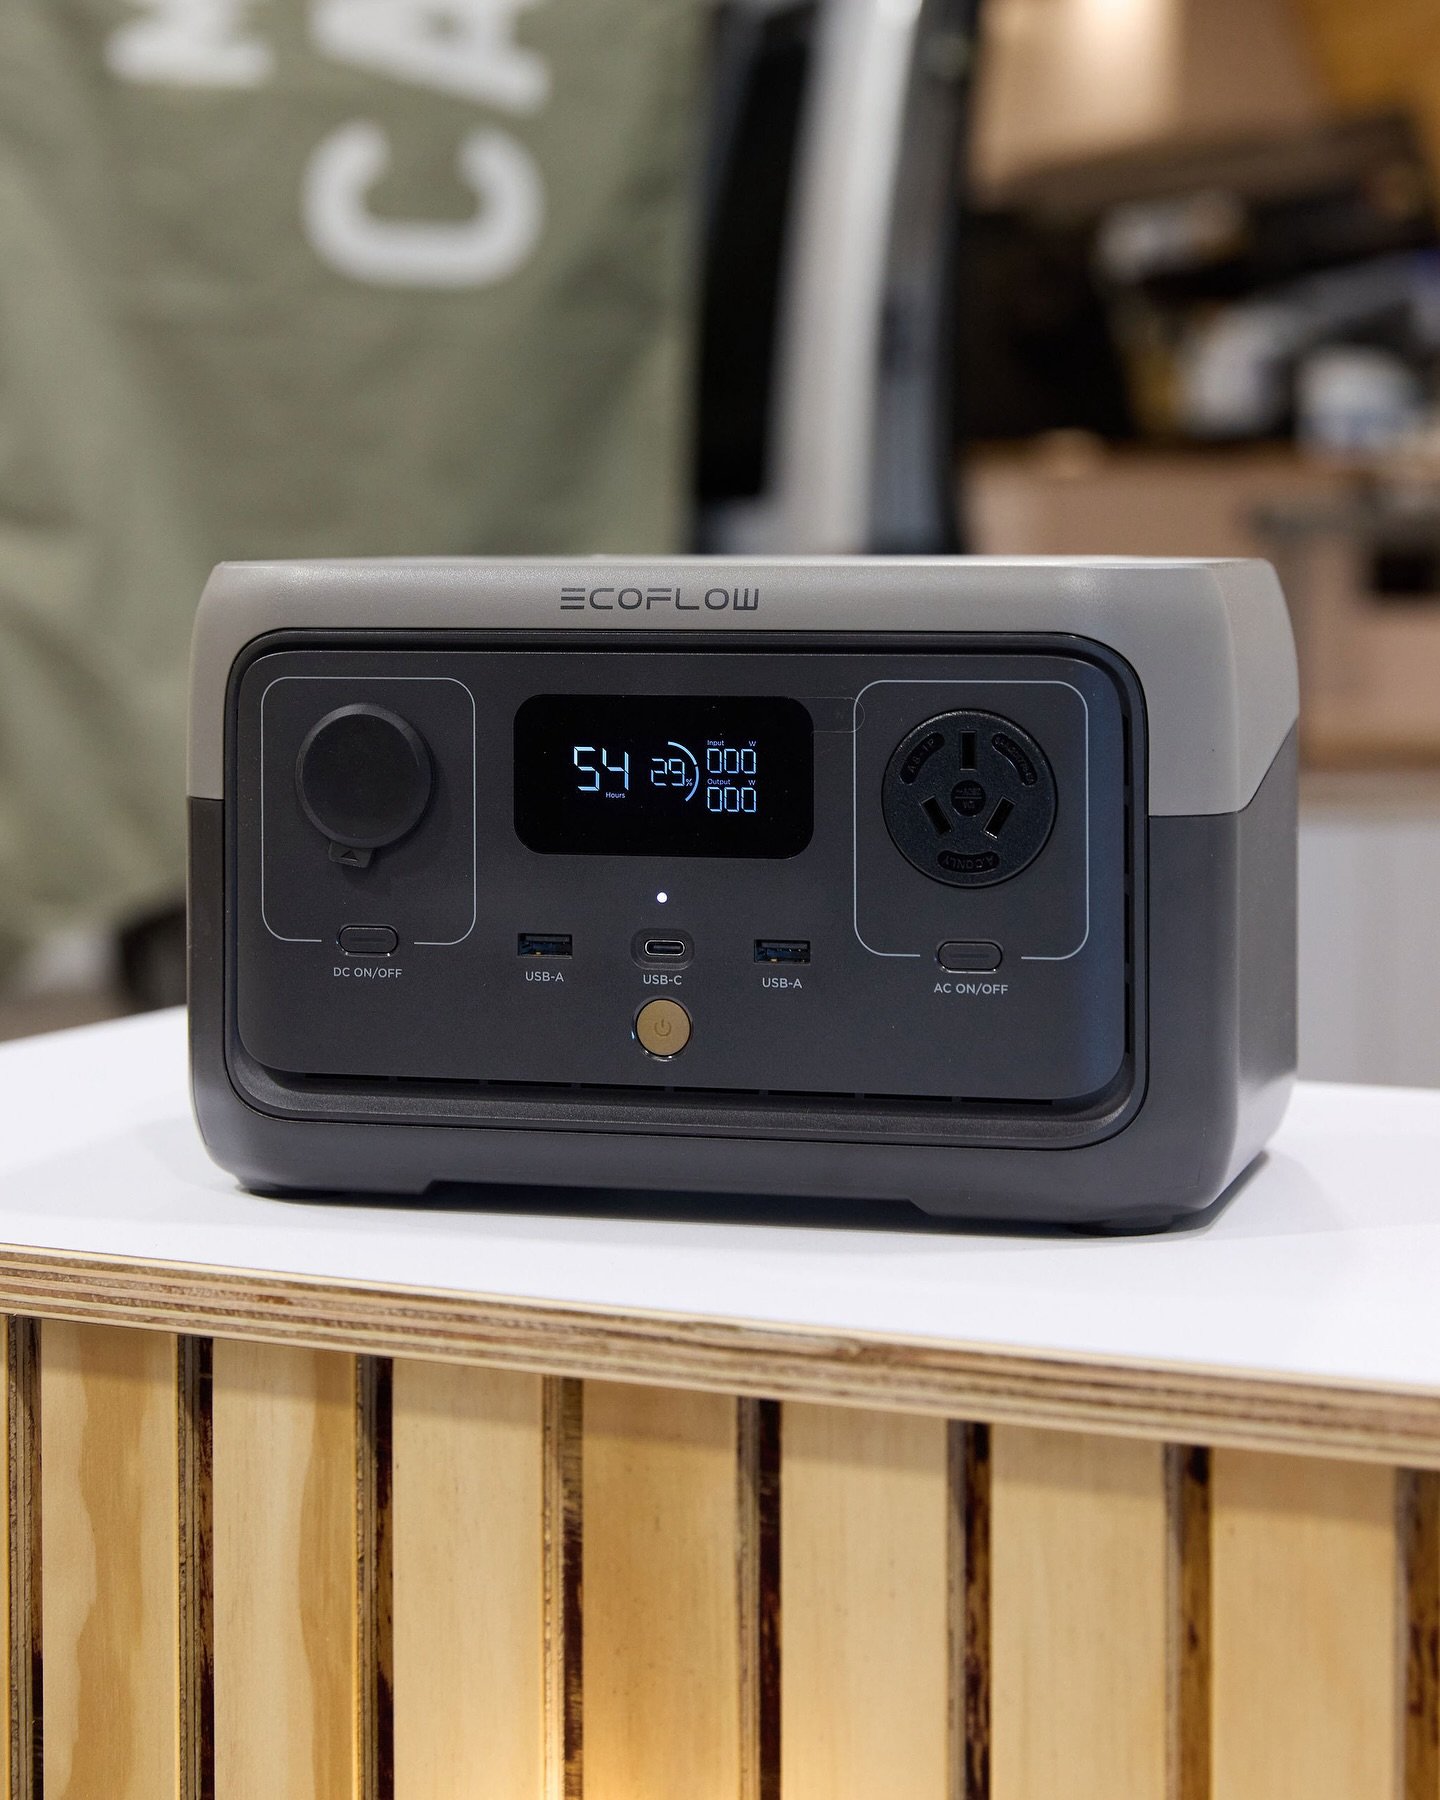 We&rsquo;ve partnered with @ecoflownz to do a giveaway competition at the Christchurch Motorhome Caravan &amp; Leisure Show! 

Come see us at the show to find out more about how to win this sweet little Ecoflow River portable power station. 

Check o